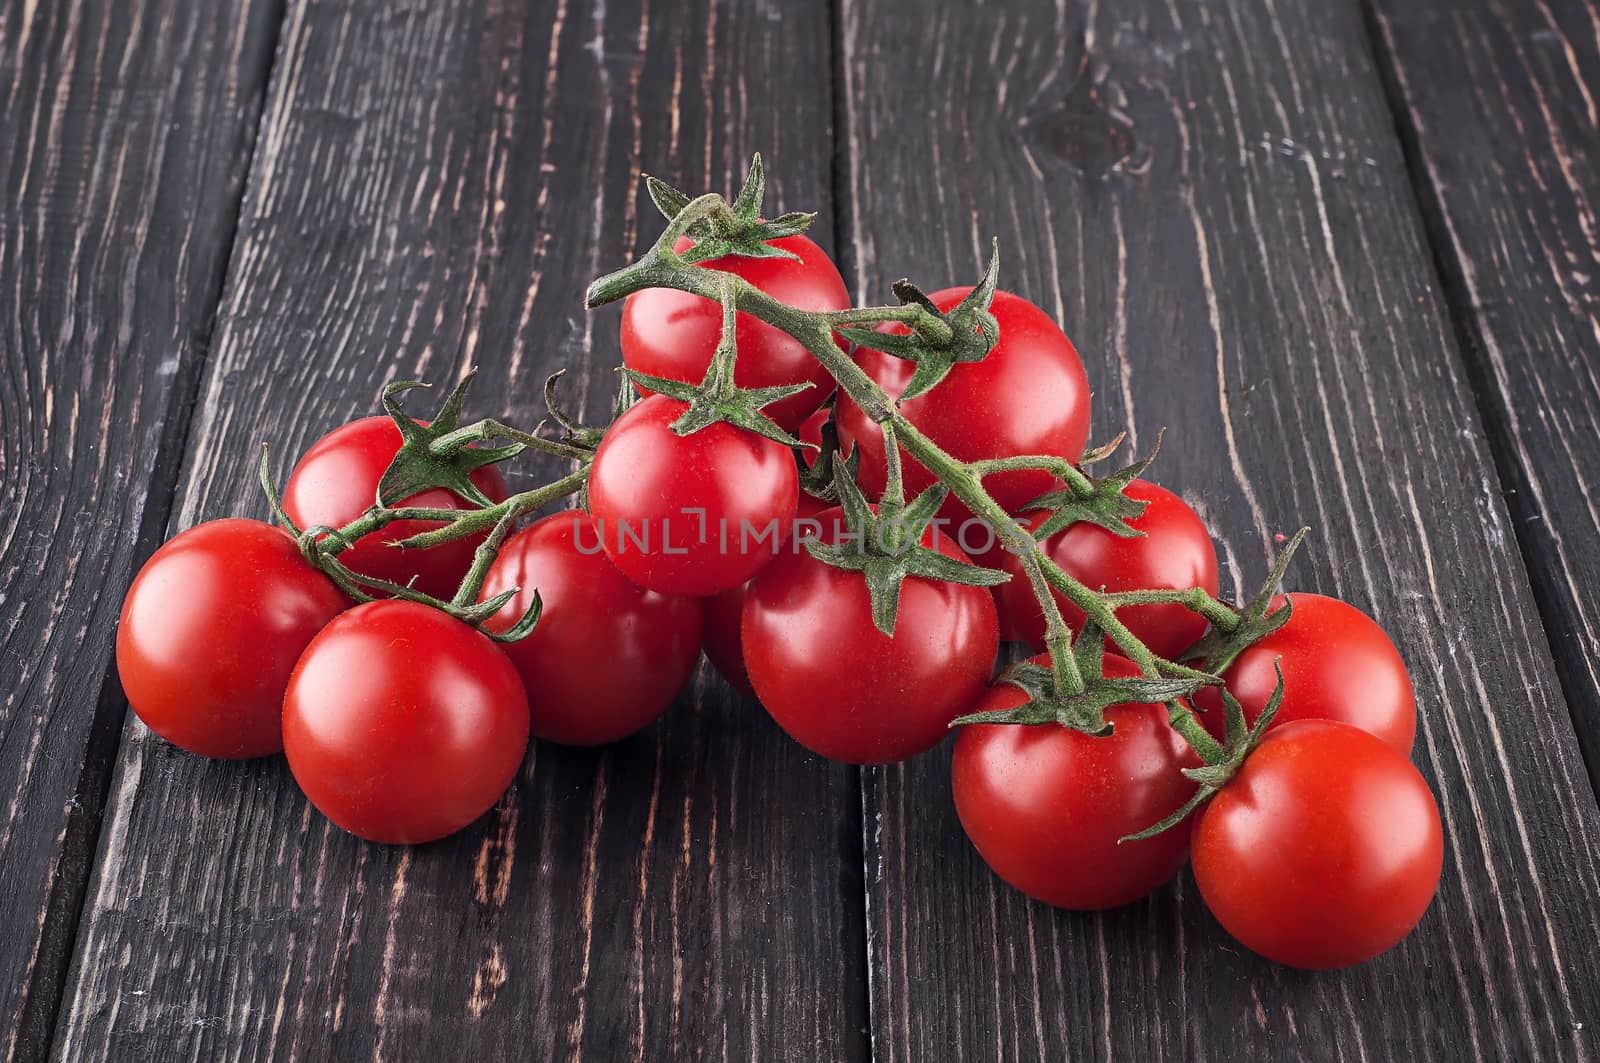 Branches cherry tomatoes on wooden table. Blurred background.